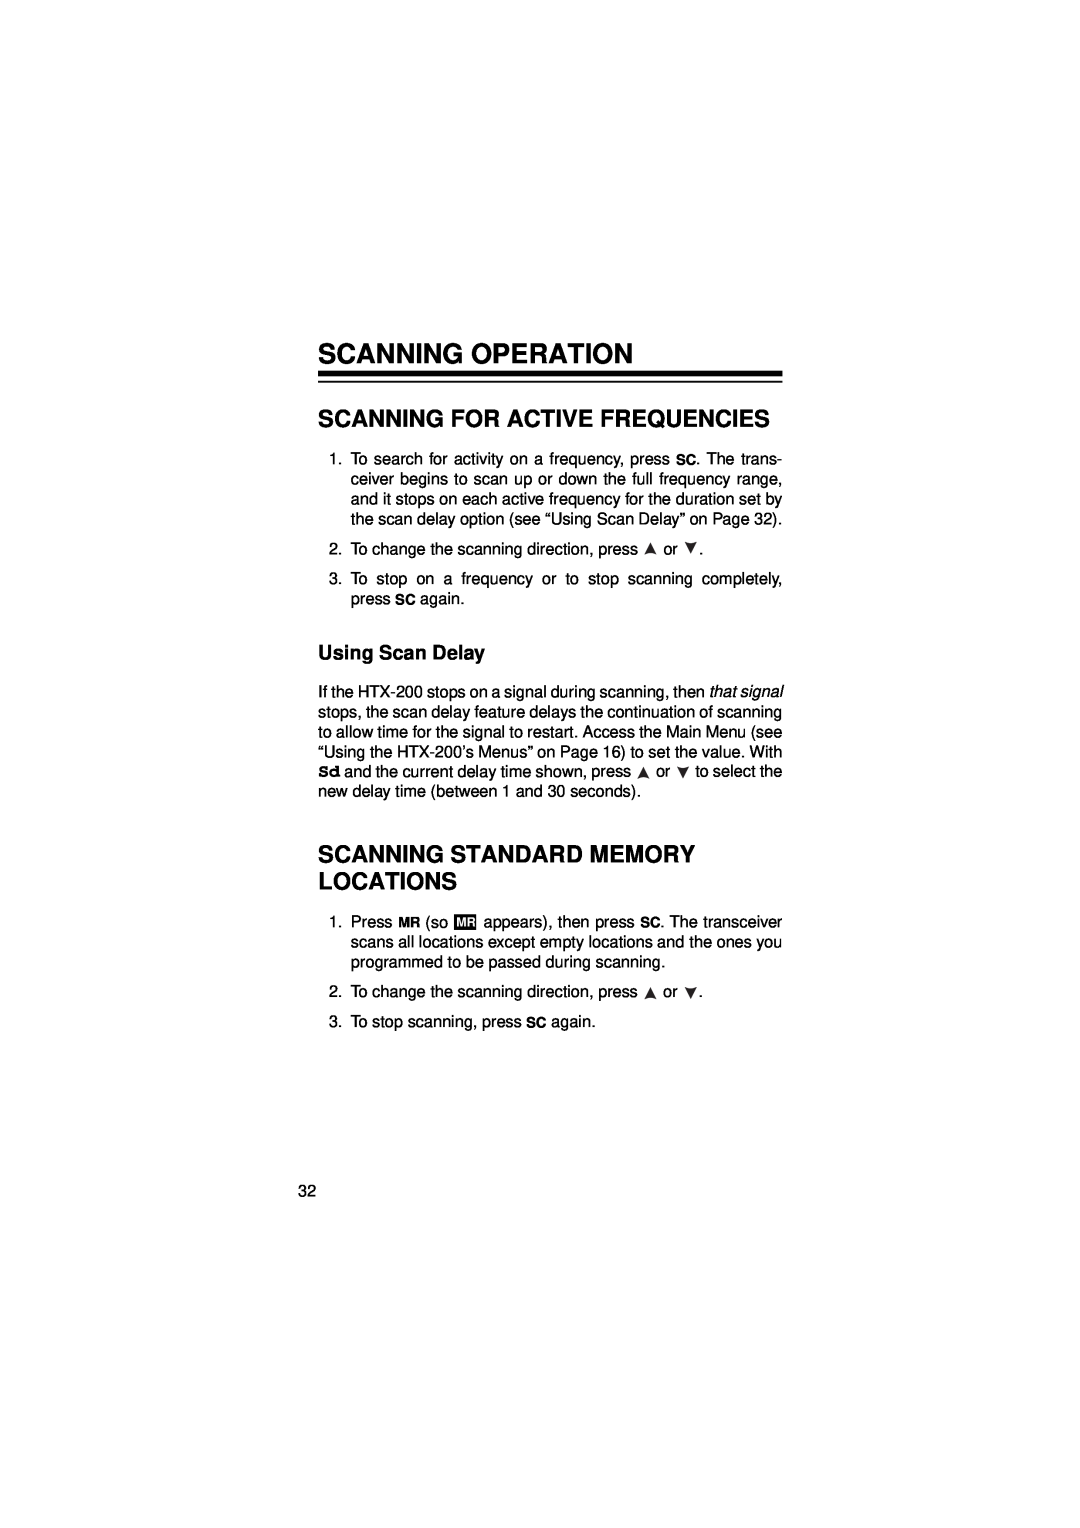 Radio Shack HTX-200 owner manual Scanning Operation, Scanning For Active Frequencies, Scanning Standard Memory Locations 